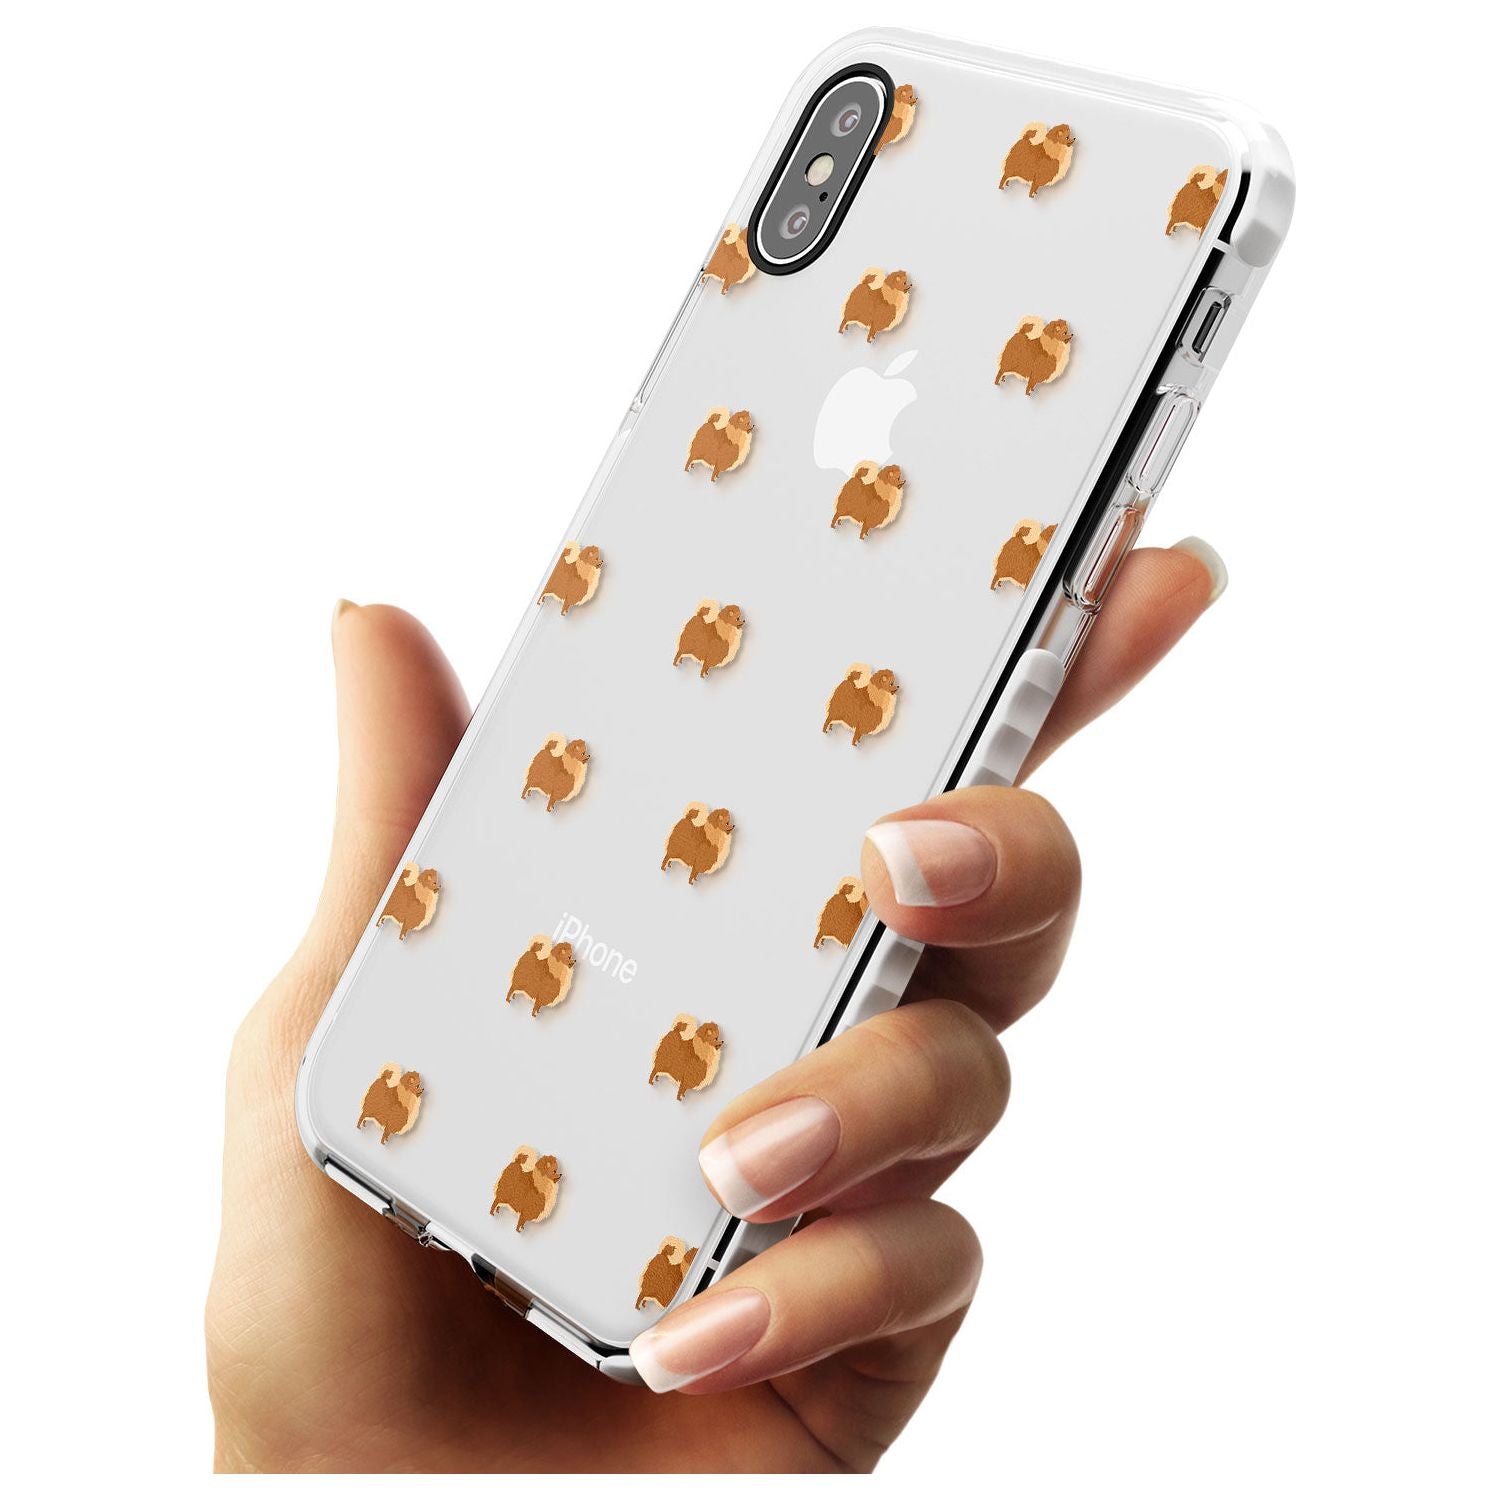 Pomeranian Dog Pattern Clear Impact Phone Case for iPhone X XS Max XR